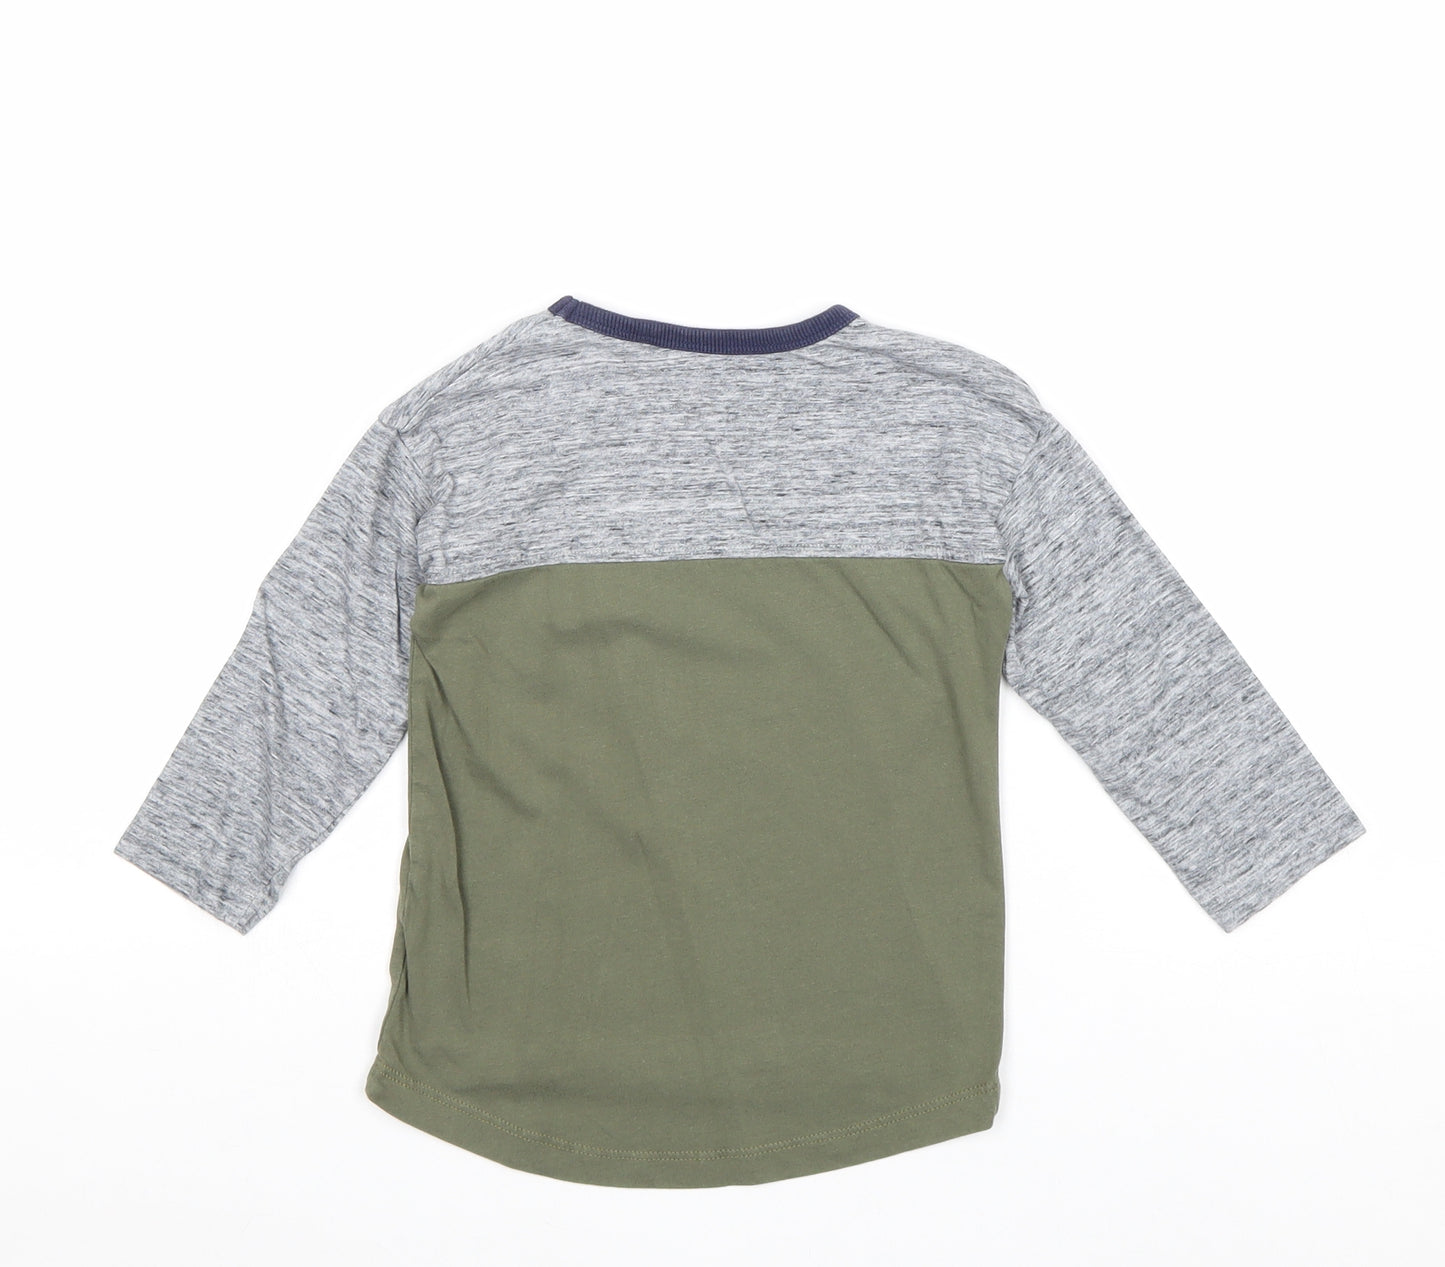 NEXT Boys Green Colourblock 100% Cotton Pullover T-Shirt Size 2-3 Years Round Neck Pullover